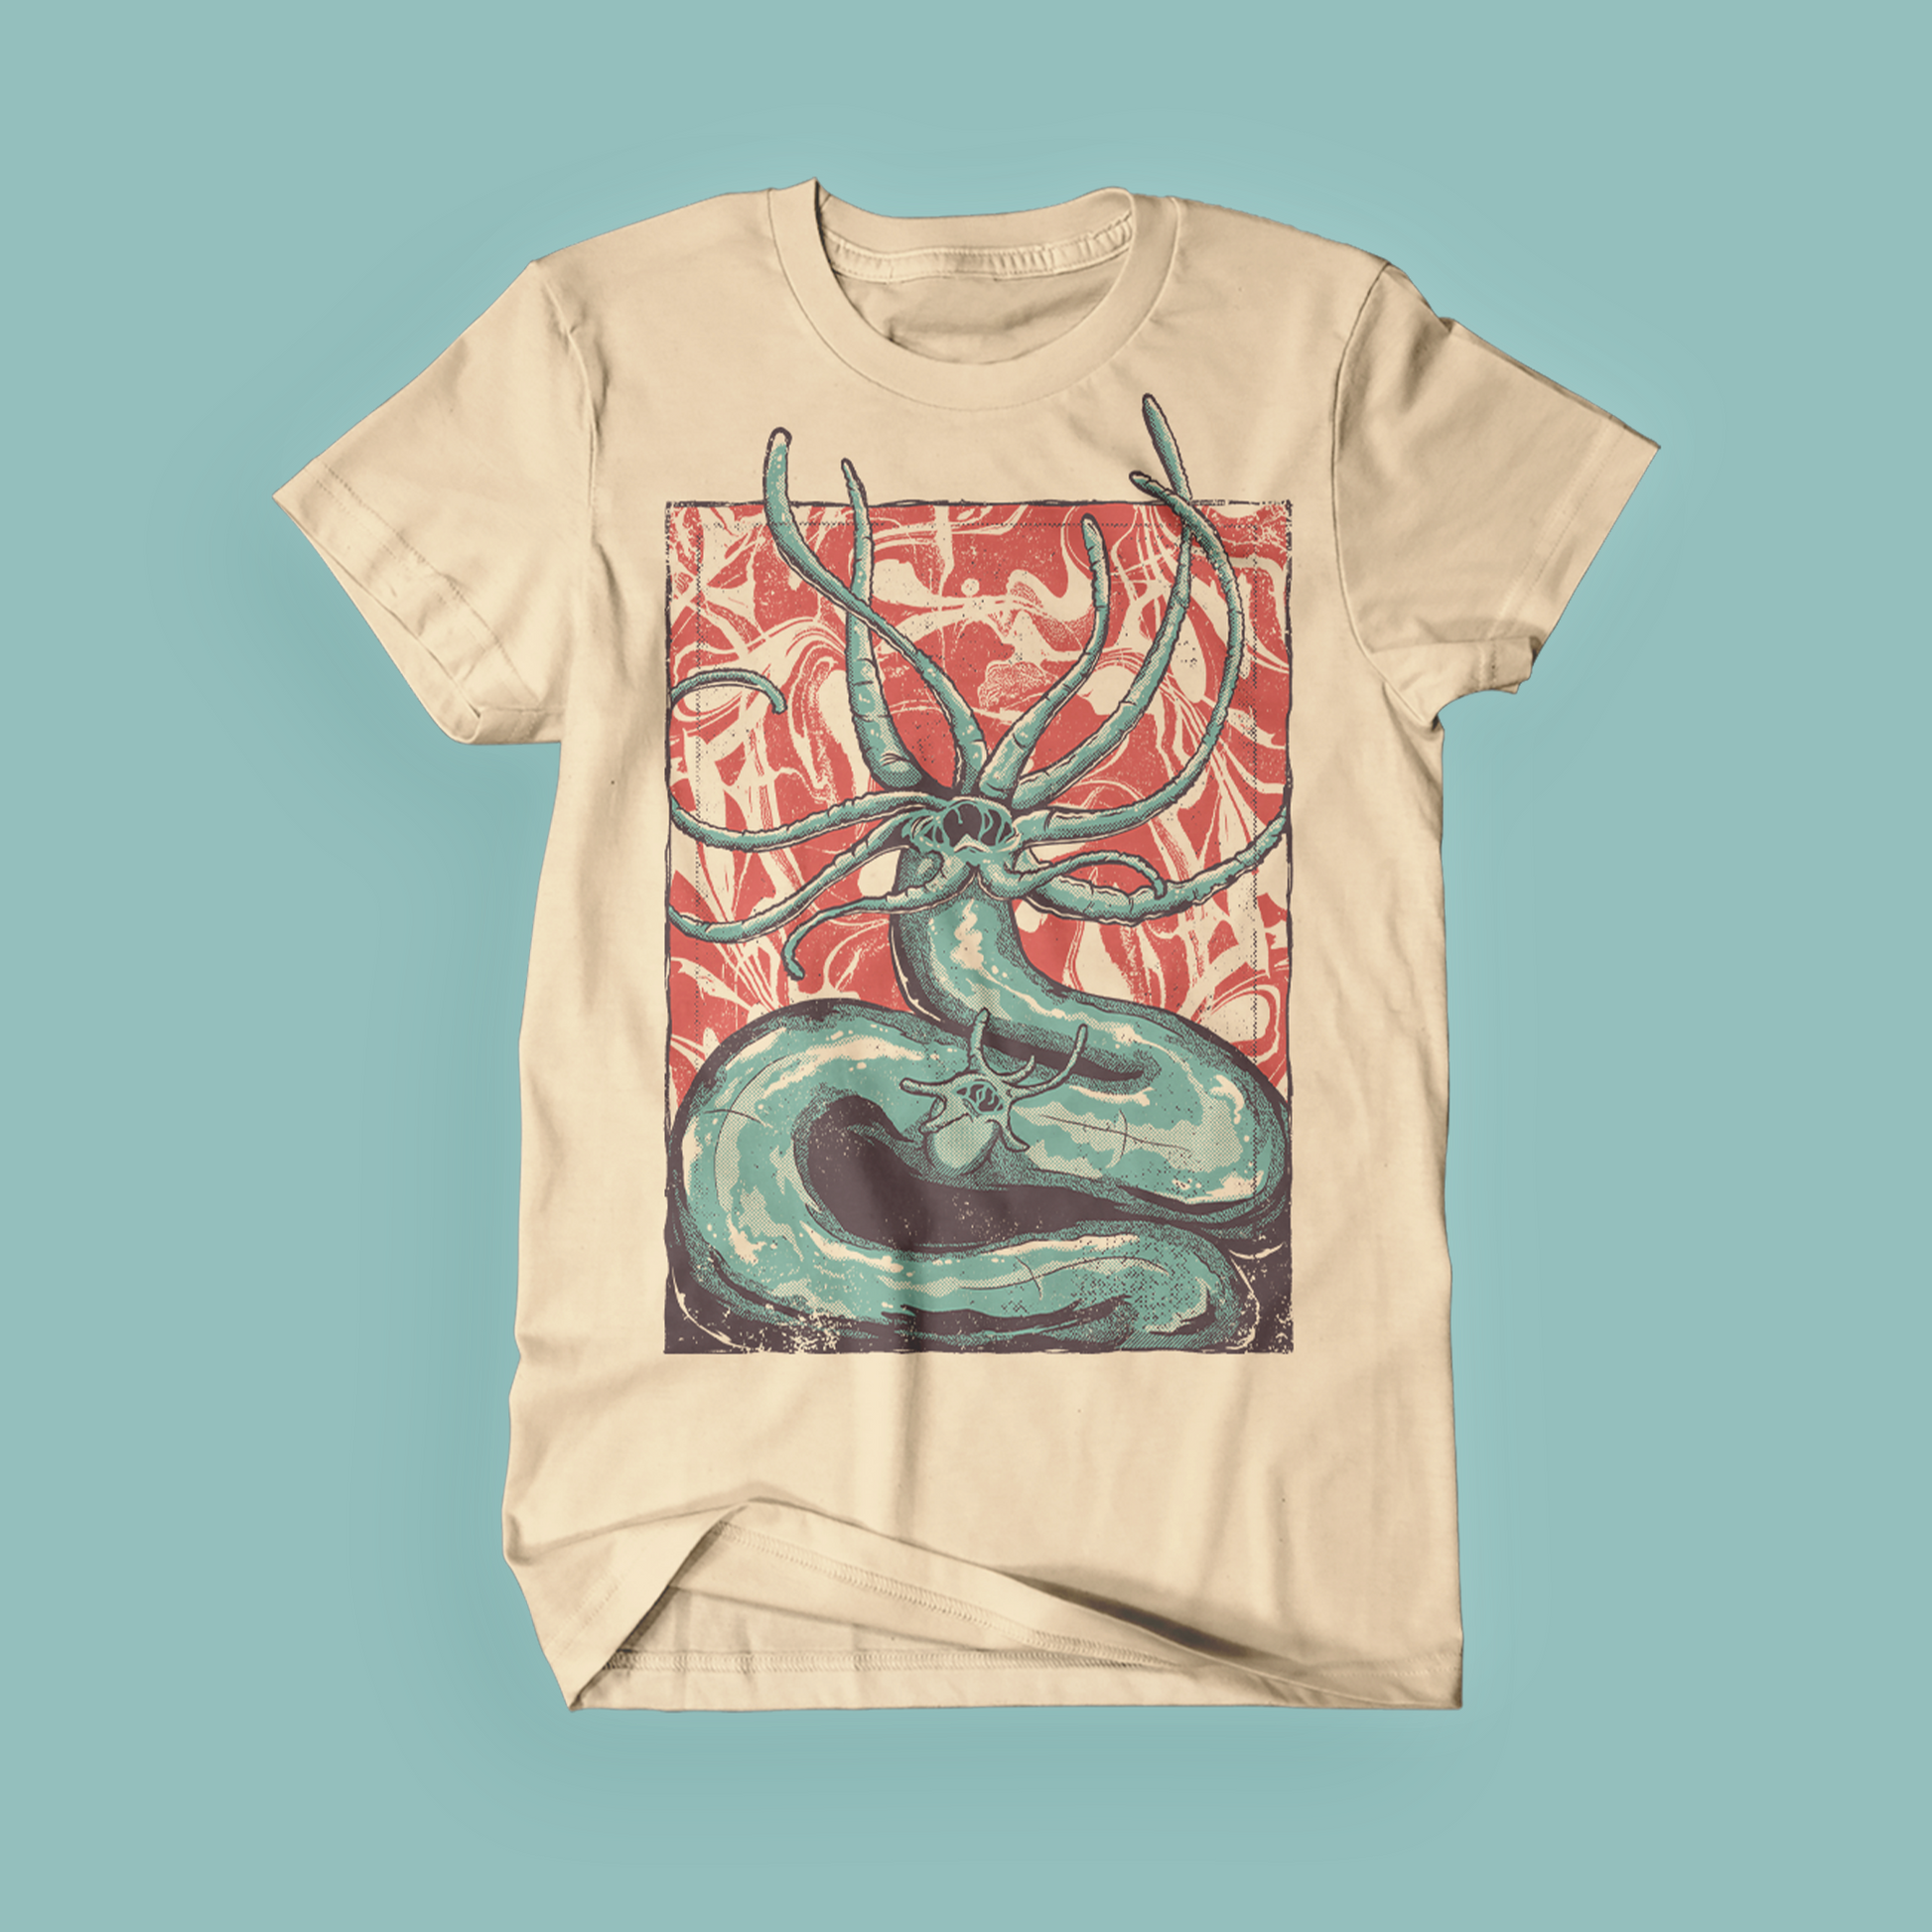 Photograph of a tan t-shirt featuring an illustration of a teal Hydra on a red background